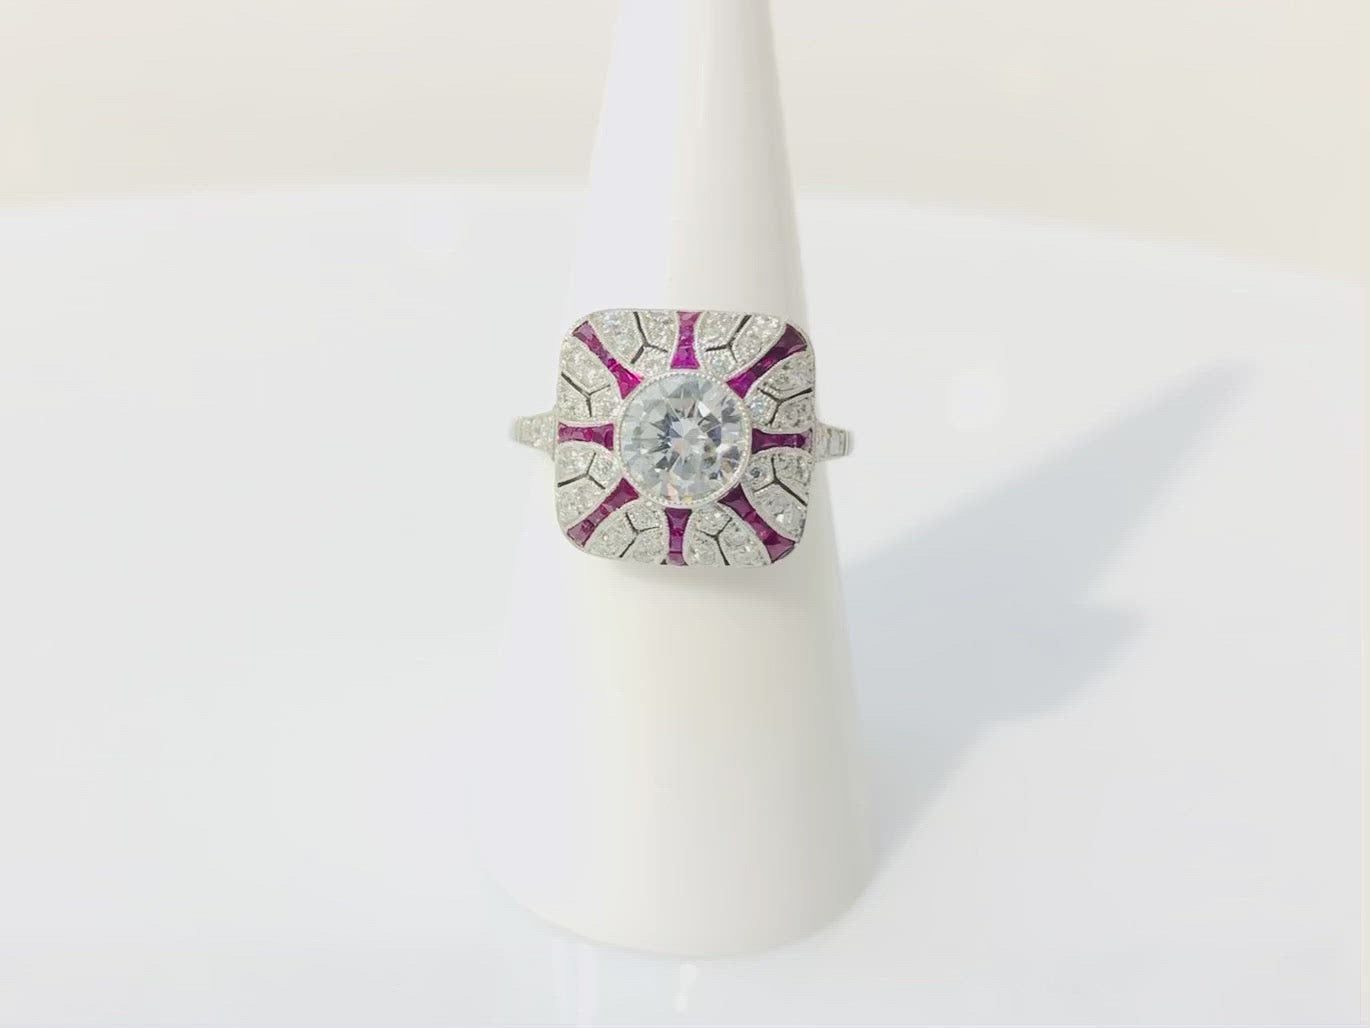 A 1 carat round brilliant diamond engagement ring has a ruby striped design.